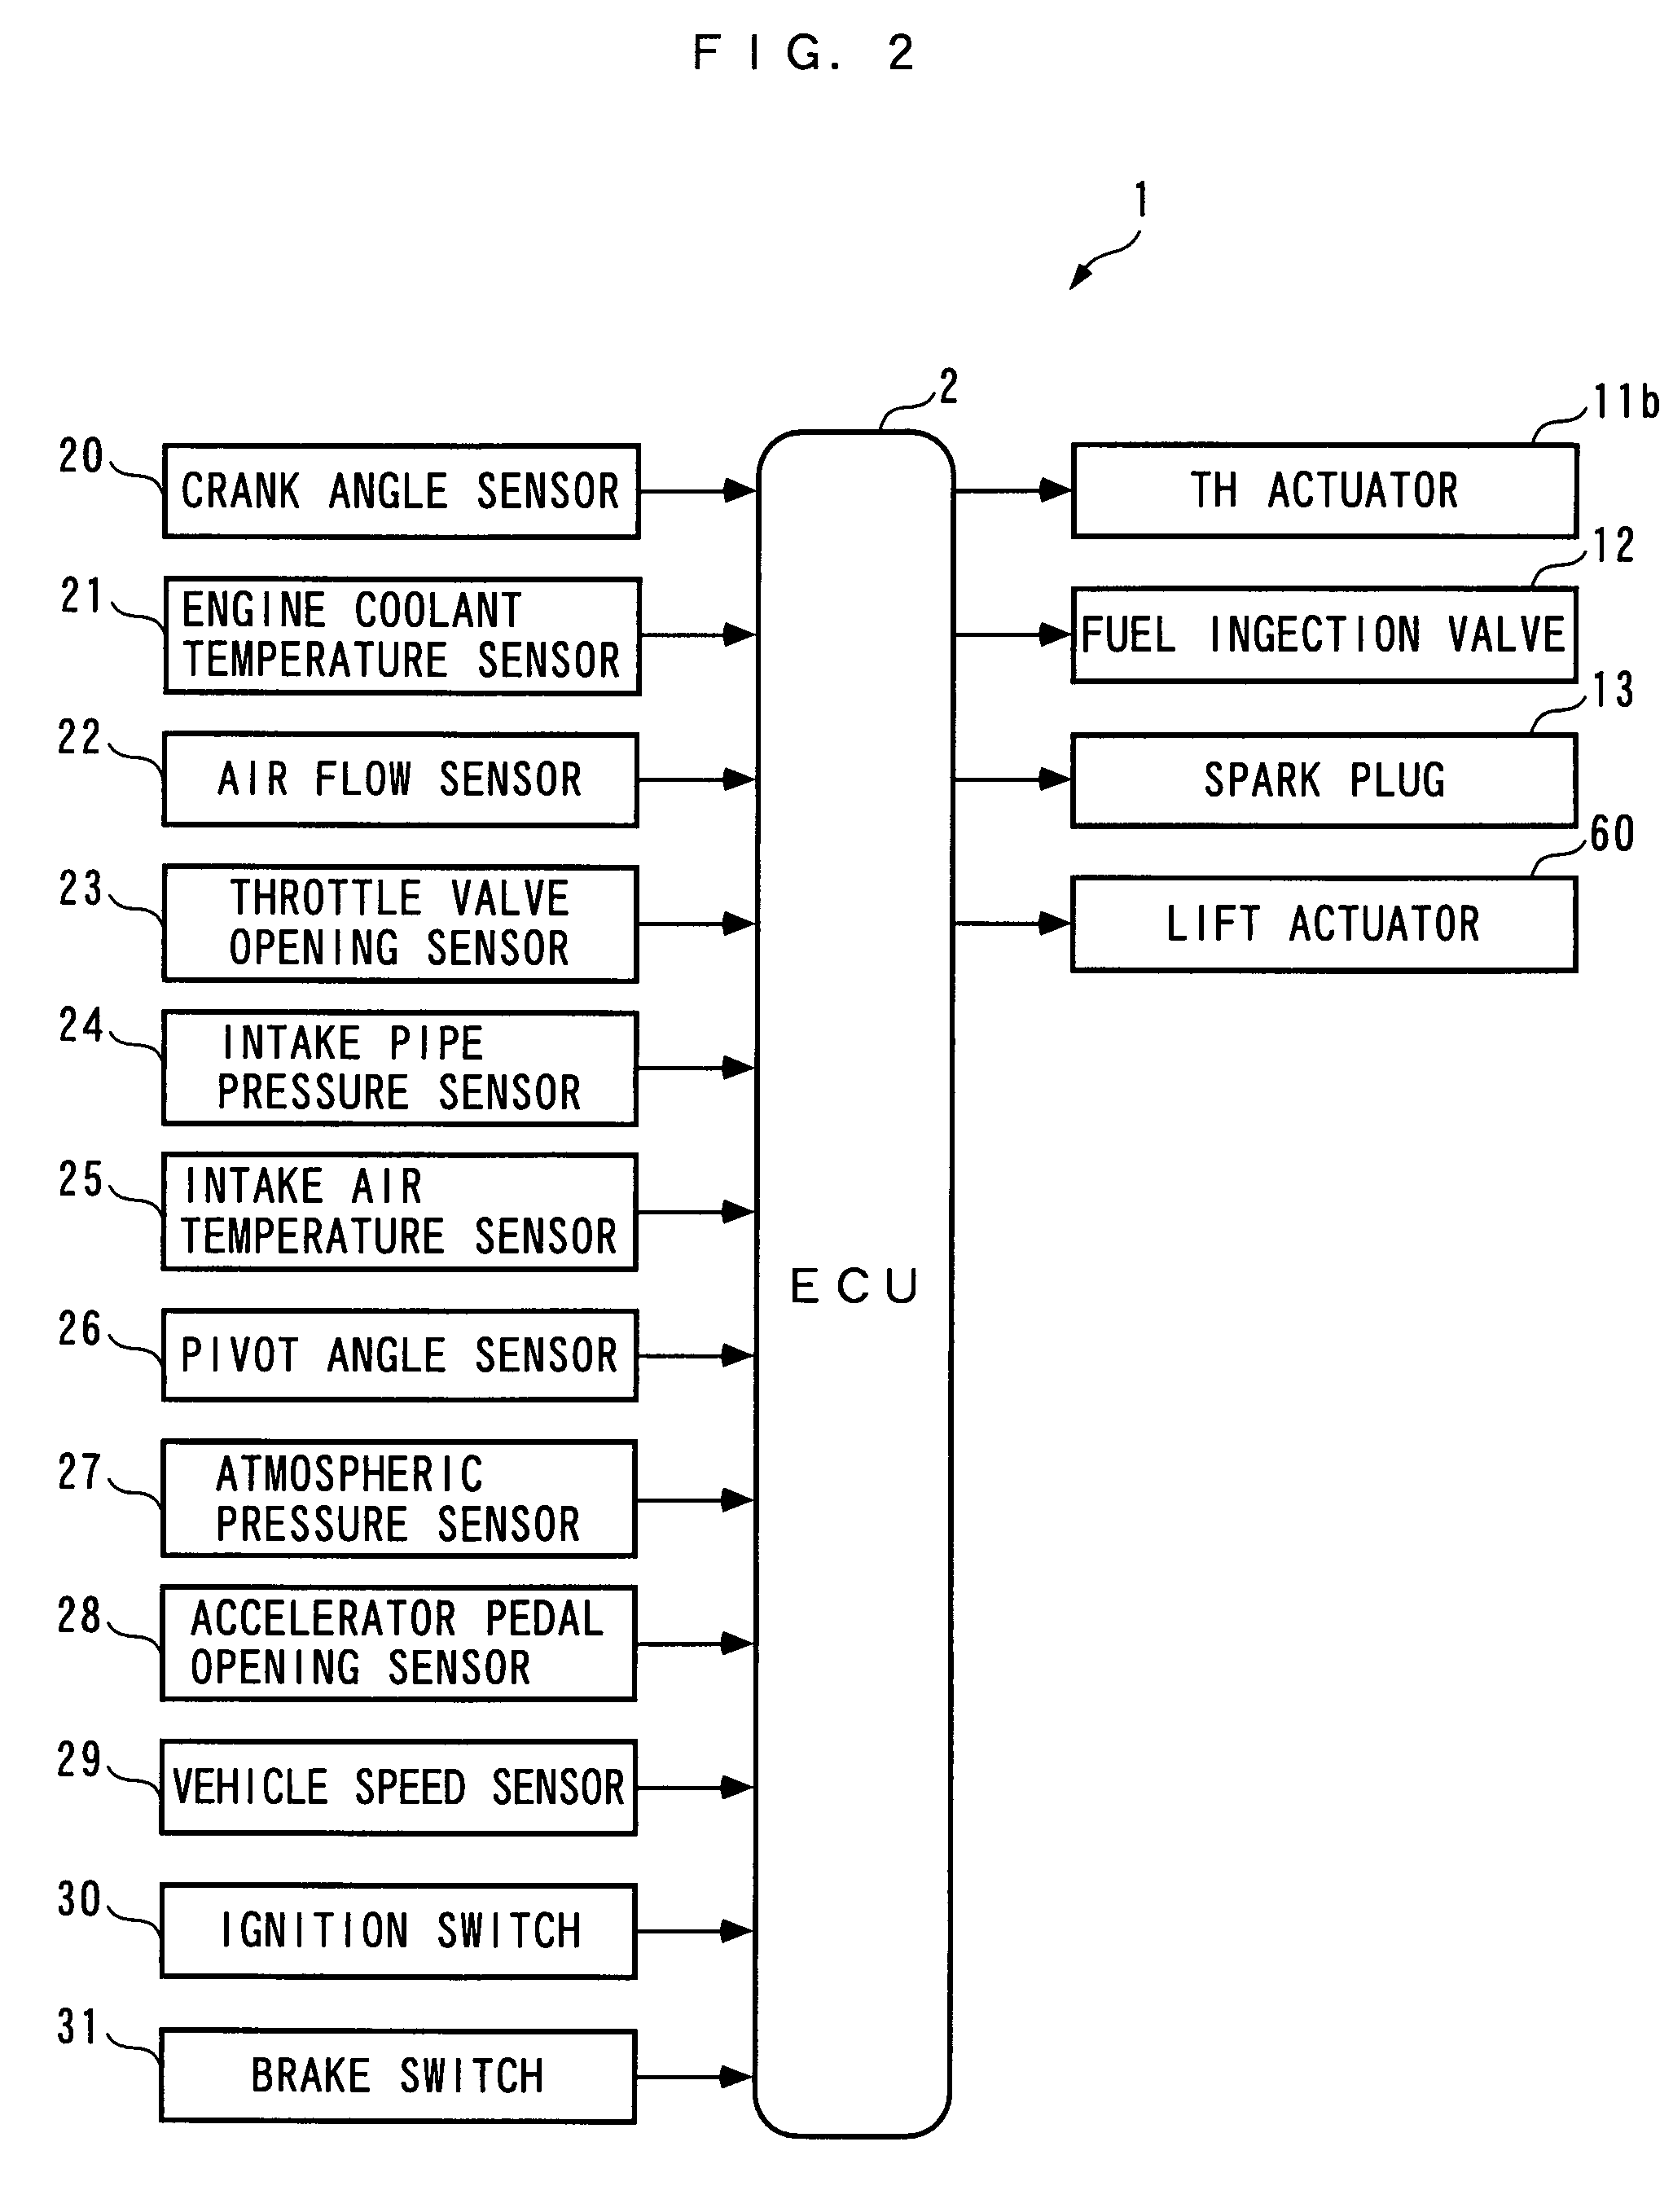 Control system for plant and internal combustion engine